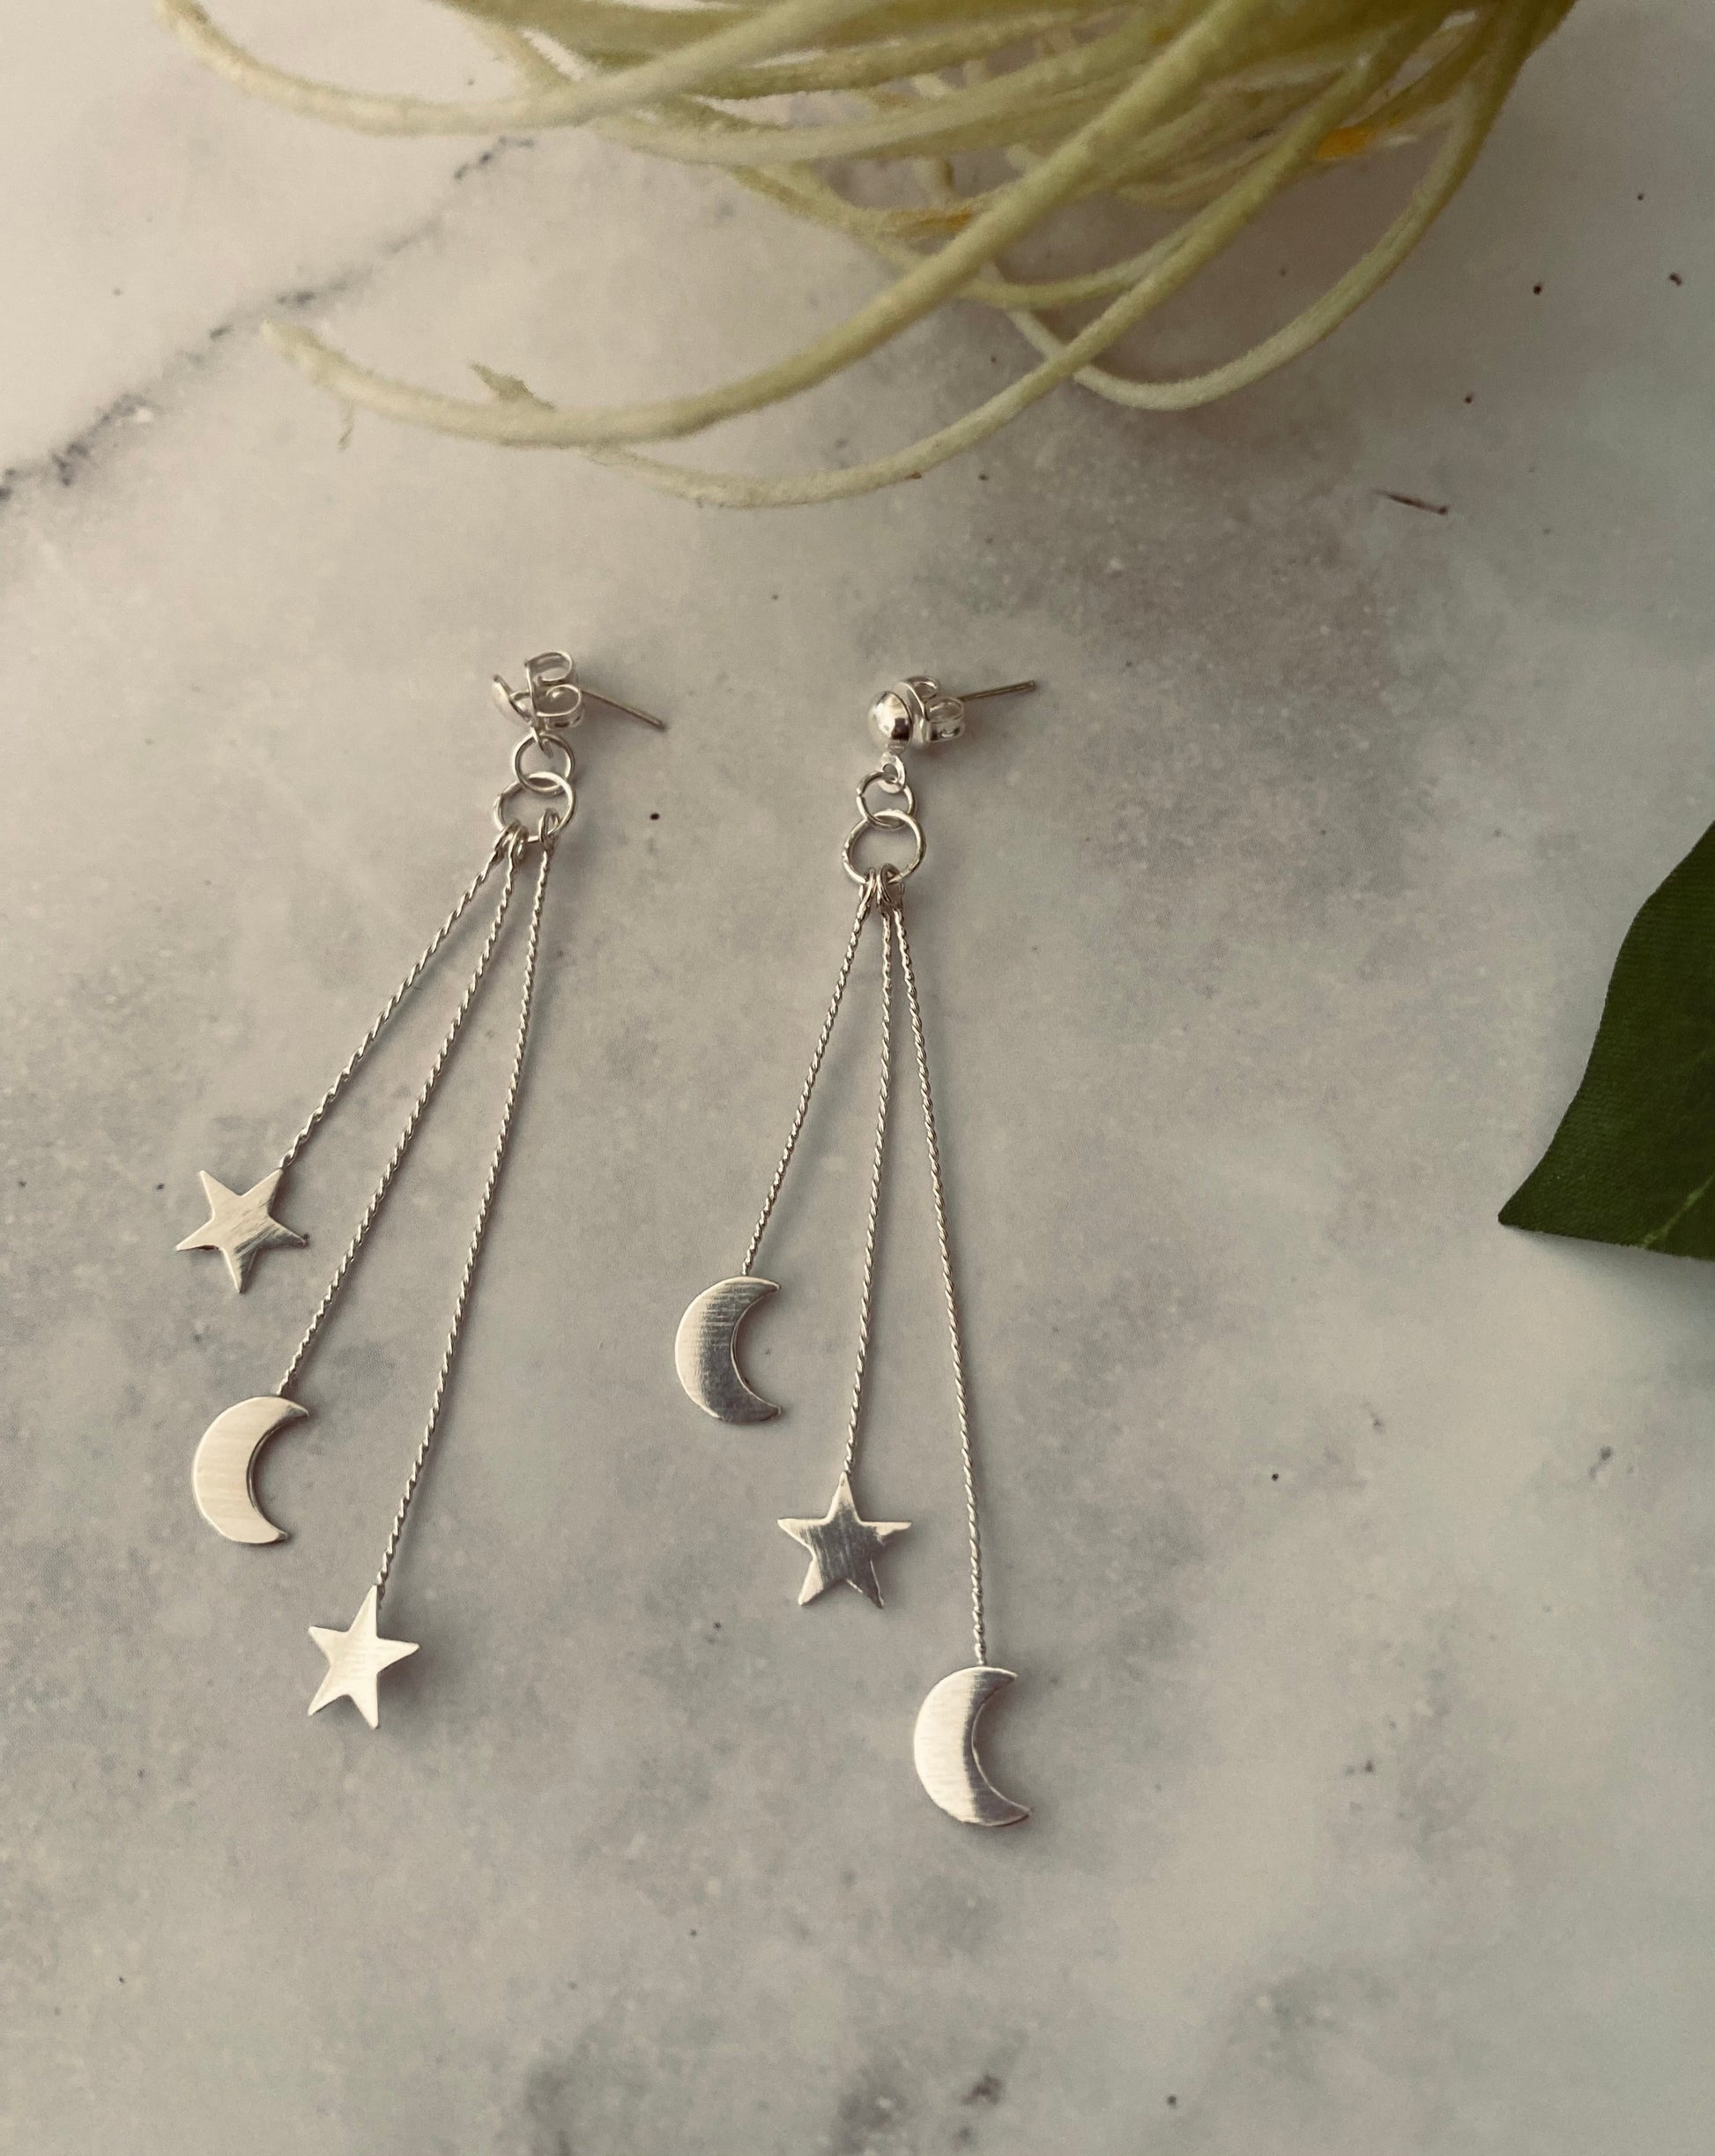 STAR & MOON EARRINGS, silver jewellery, Mexican Silver, Star and Moon